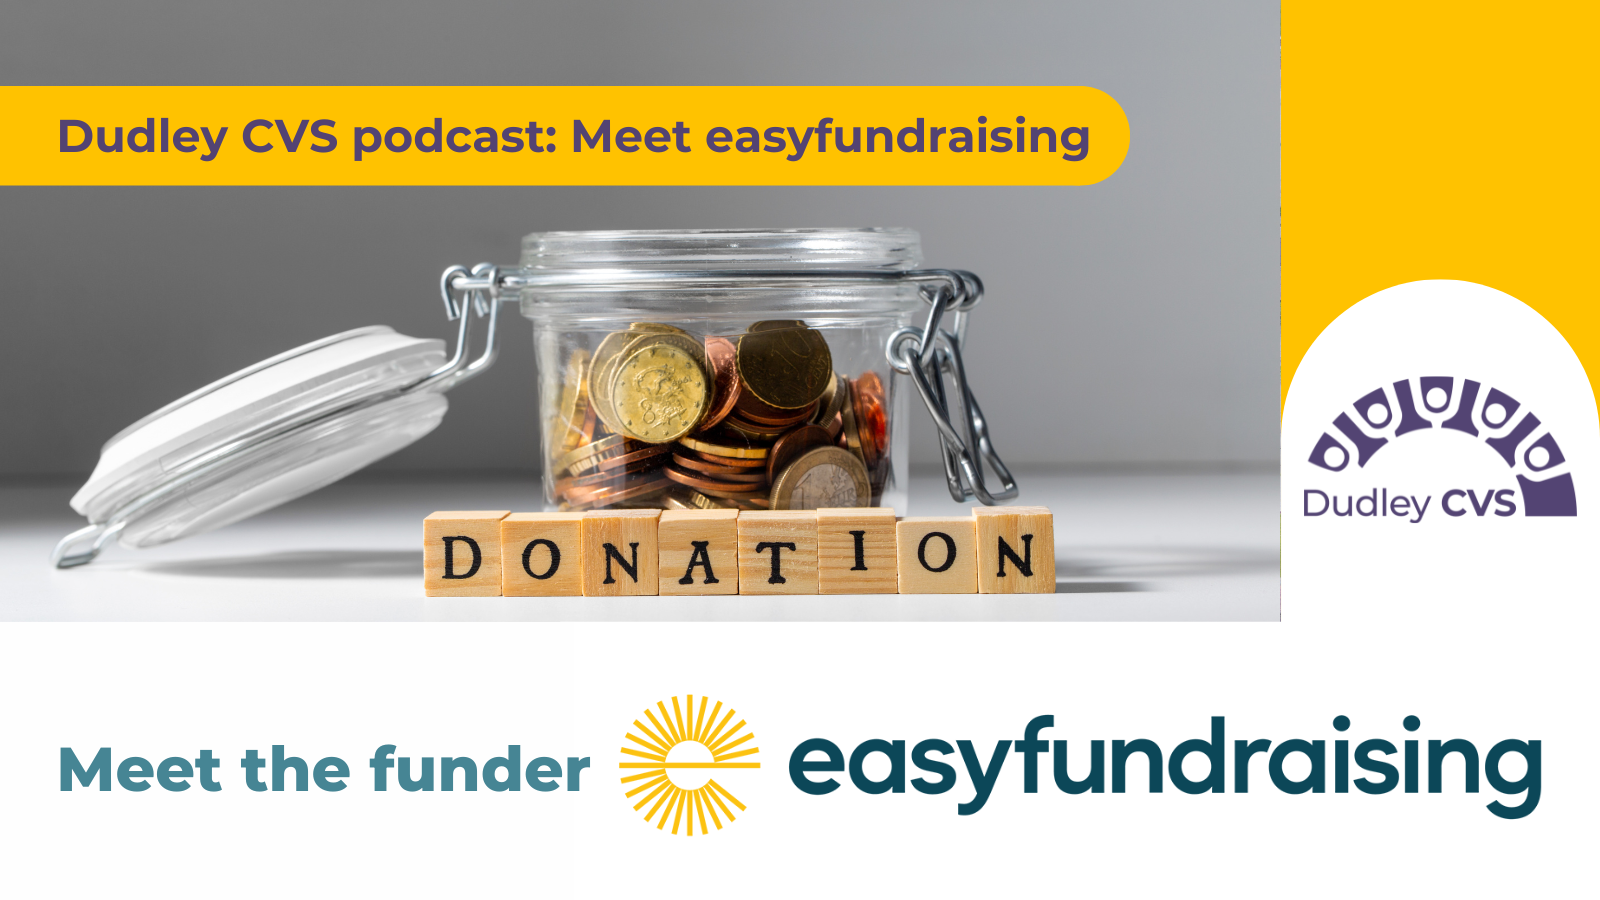 Featured image for “Dudley CVS podcast with easyfundraising”